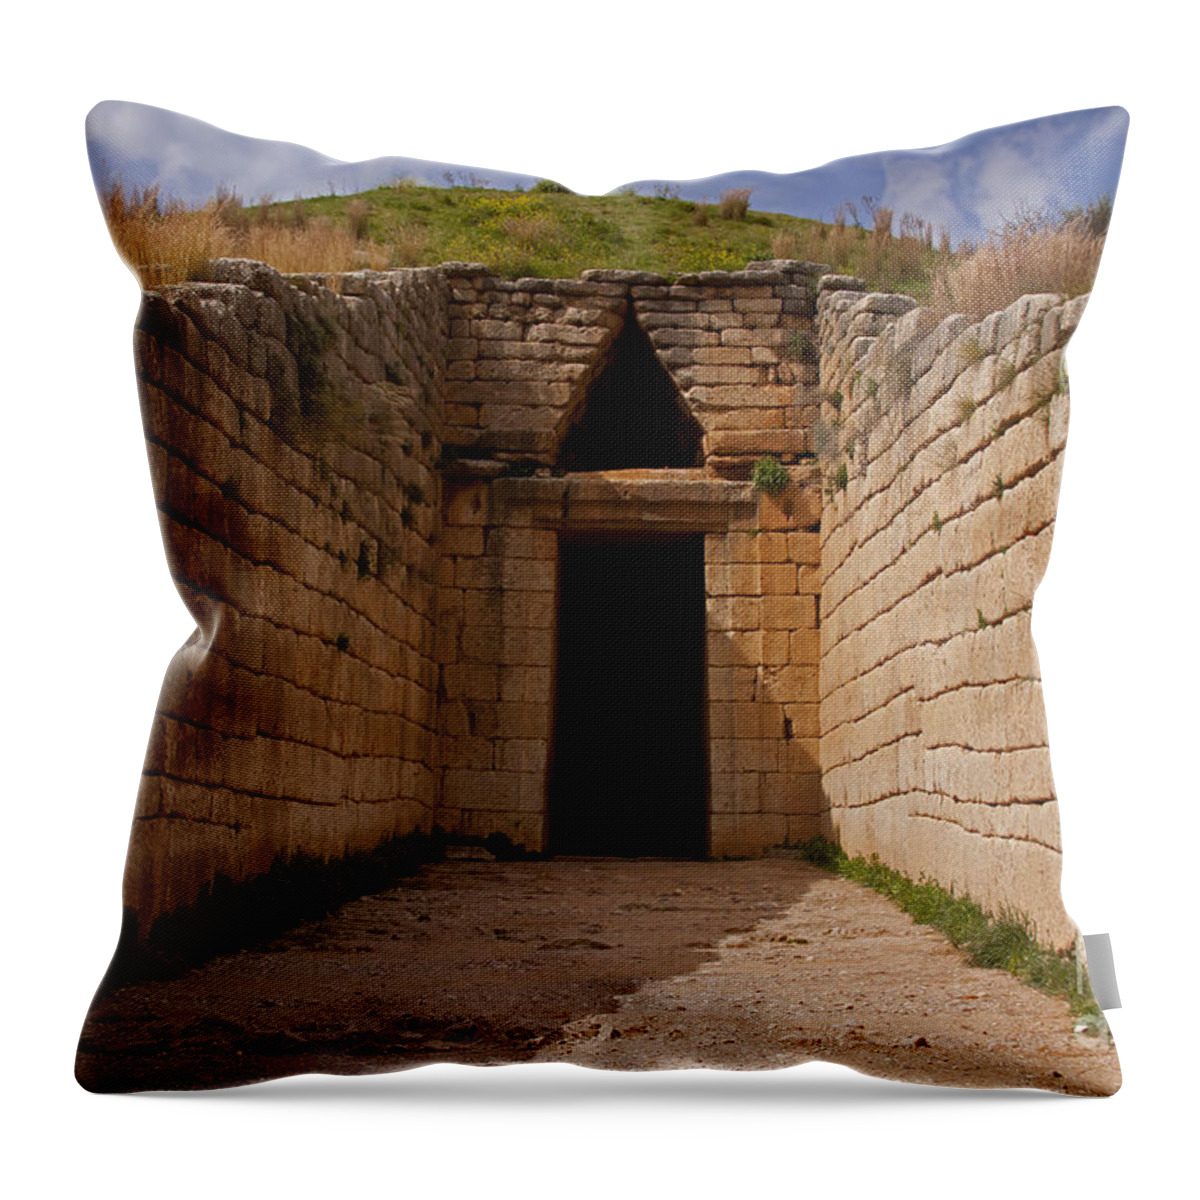 Treasury Of Ateus Throw Pillow featuring the photograph Treasury Of Ateus  #7559 by J L Woody Wooden